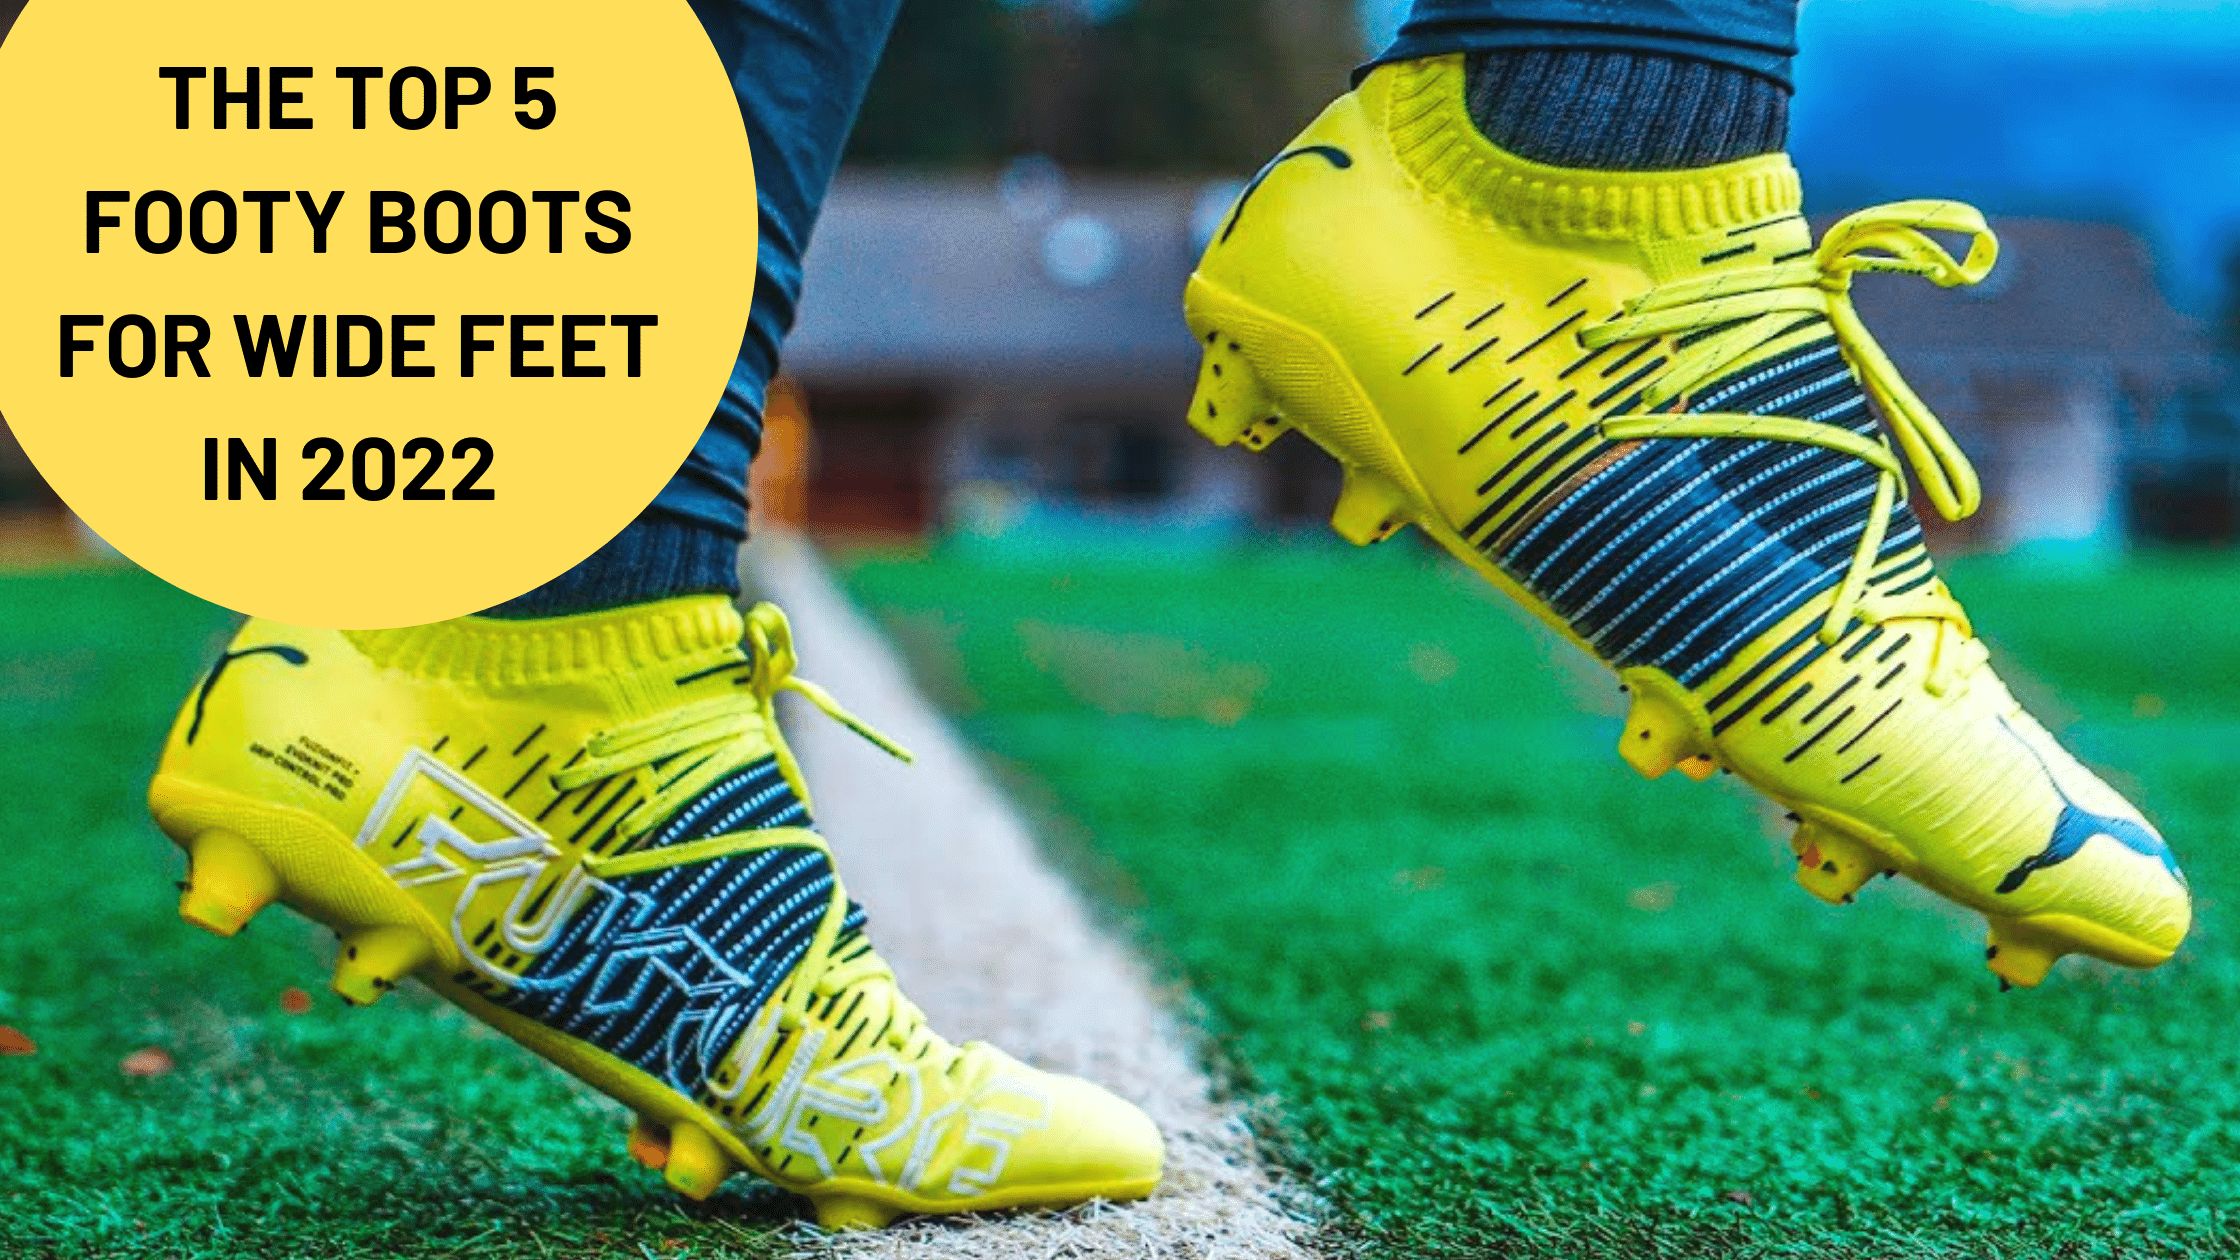 THE TOP 5 FOOTY BOOTS FOR WIDE FEET IN 2022 - Well Heeled Podiatry